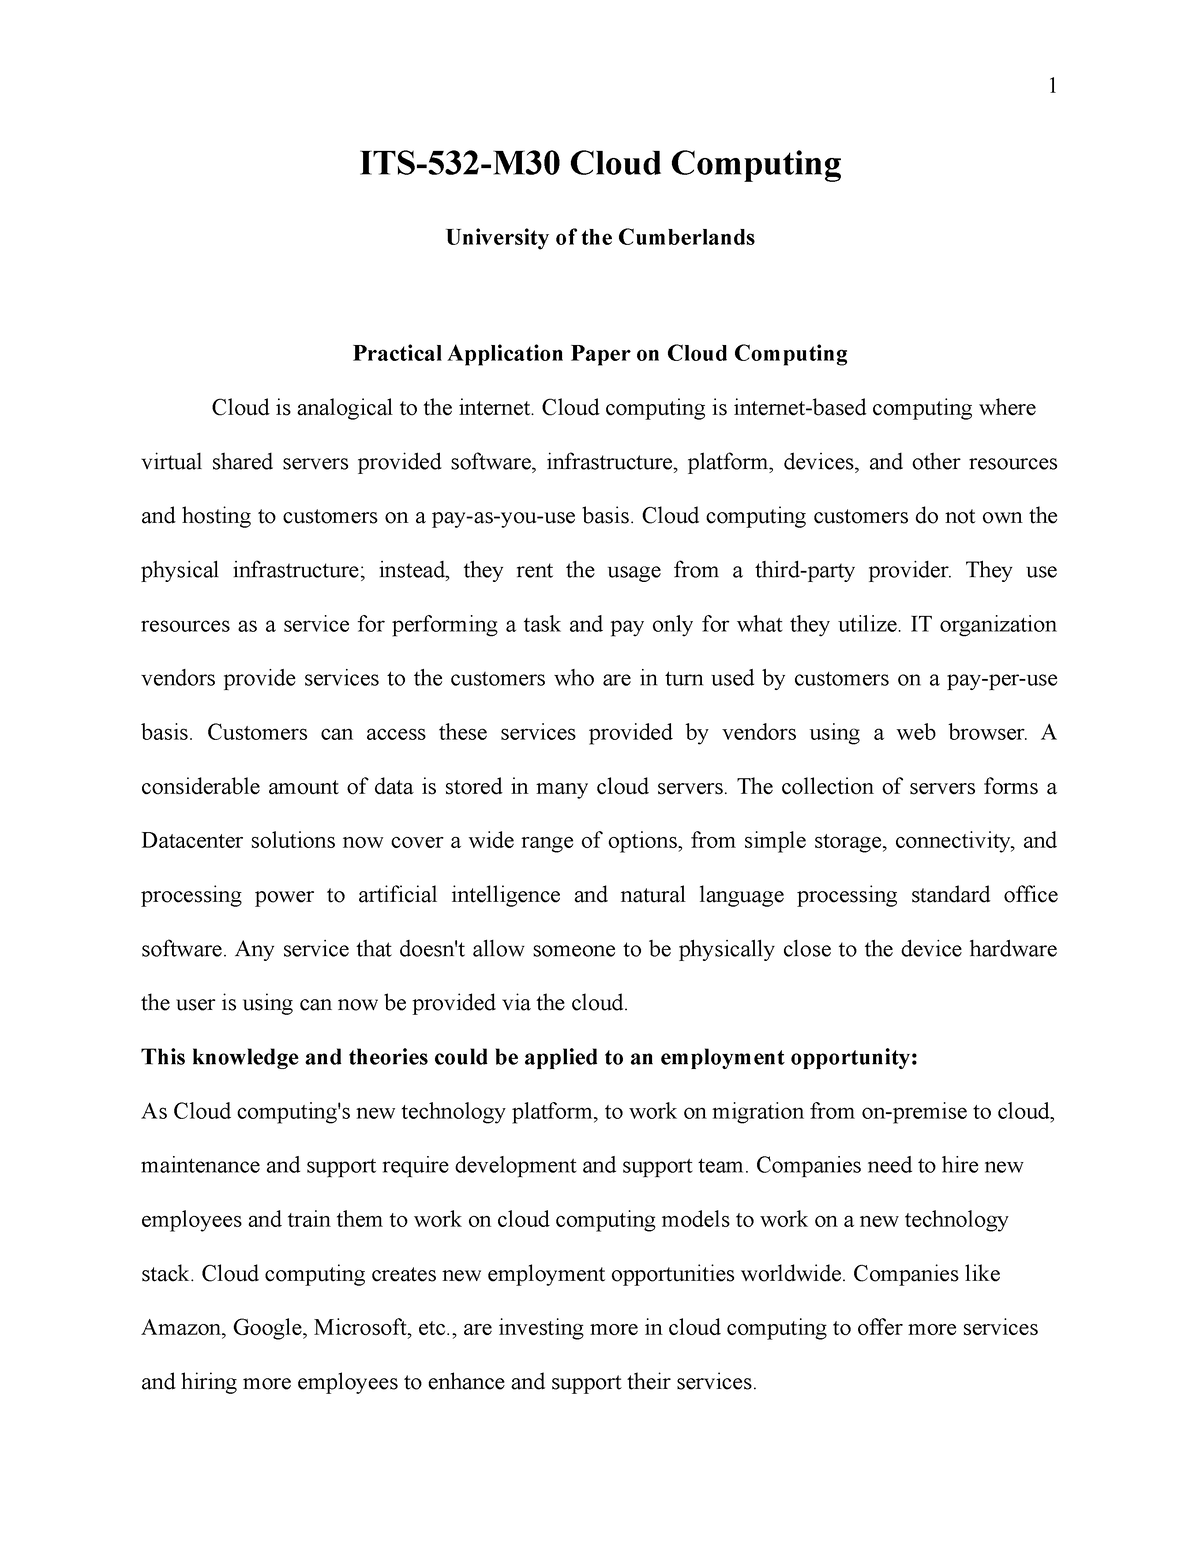 research paper on cloud computing applications